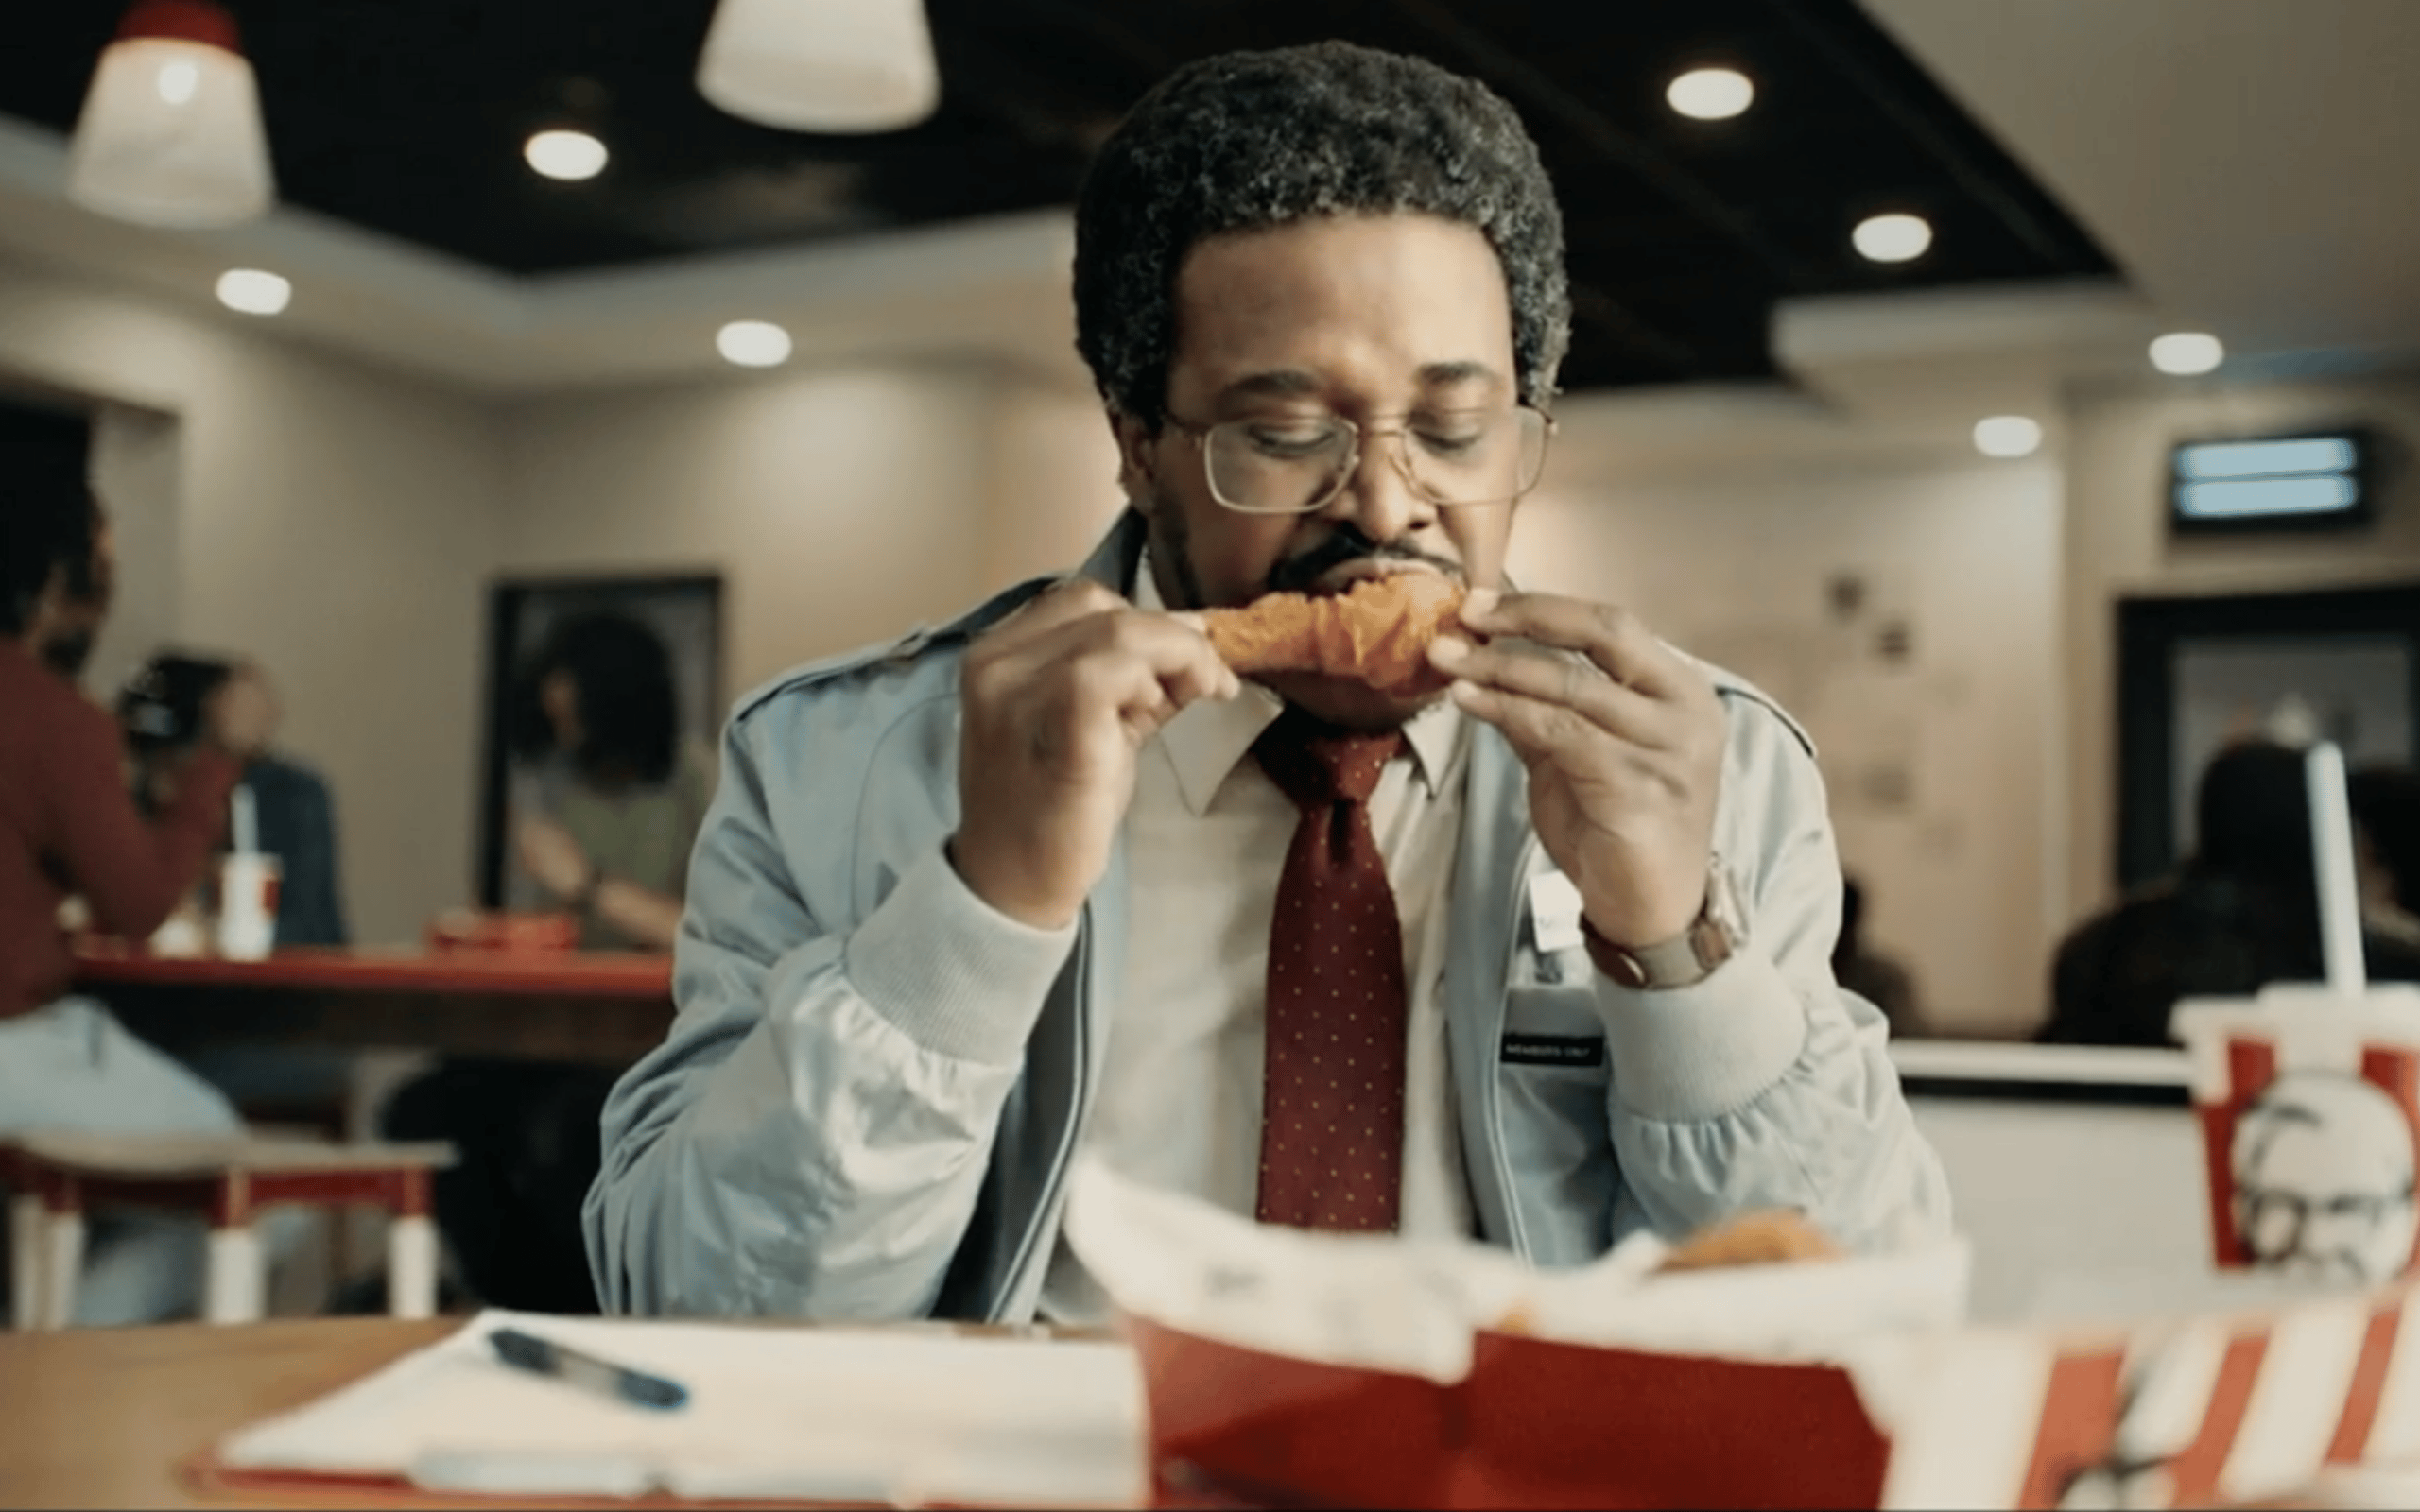 Fake quality control inspector takes a bite out of his KFC chicken